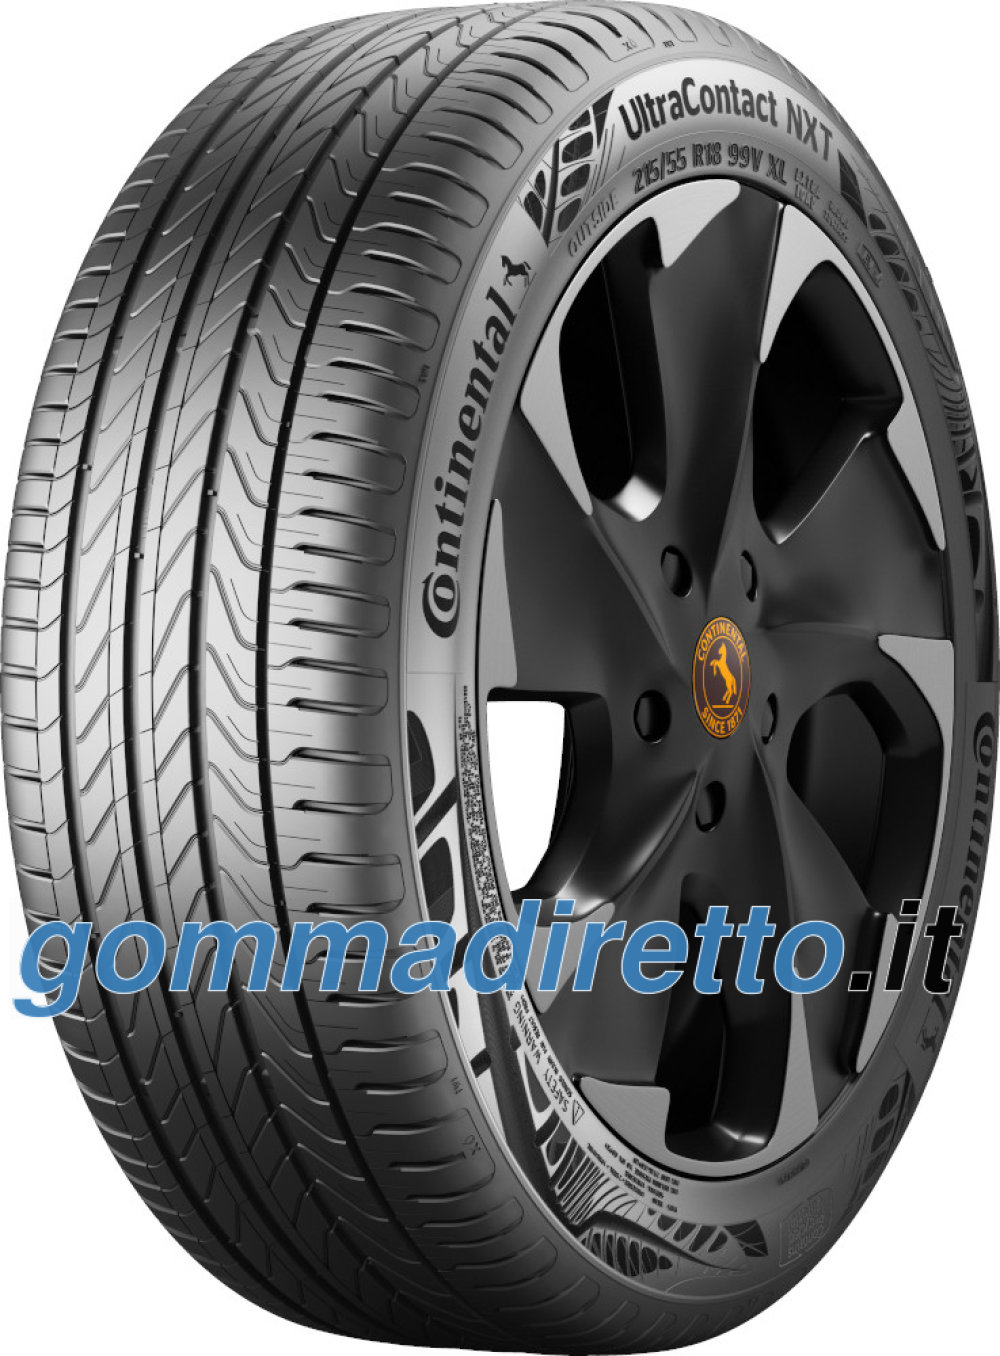 Image of Continental UltraContact NXT - ContiRe.Tex ( 215/50 R18 96W XL CRM, EVc )